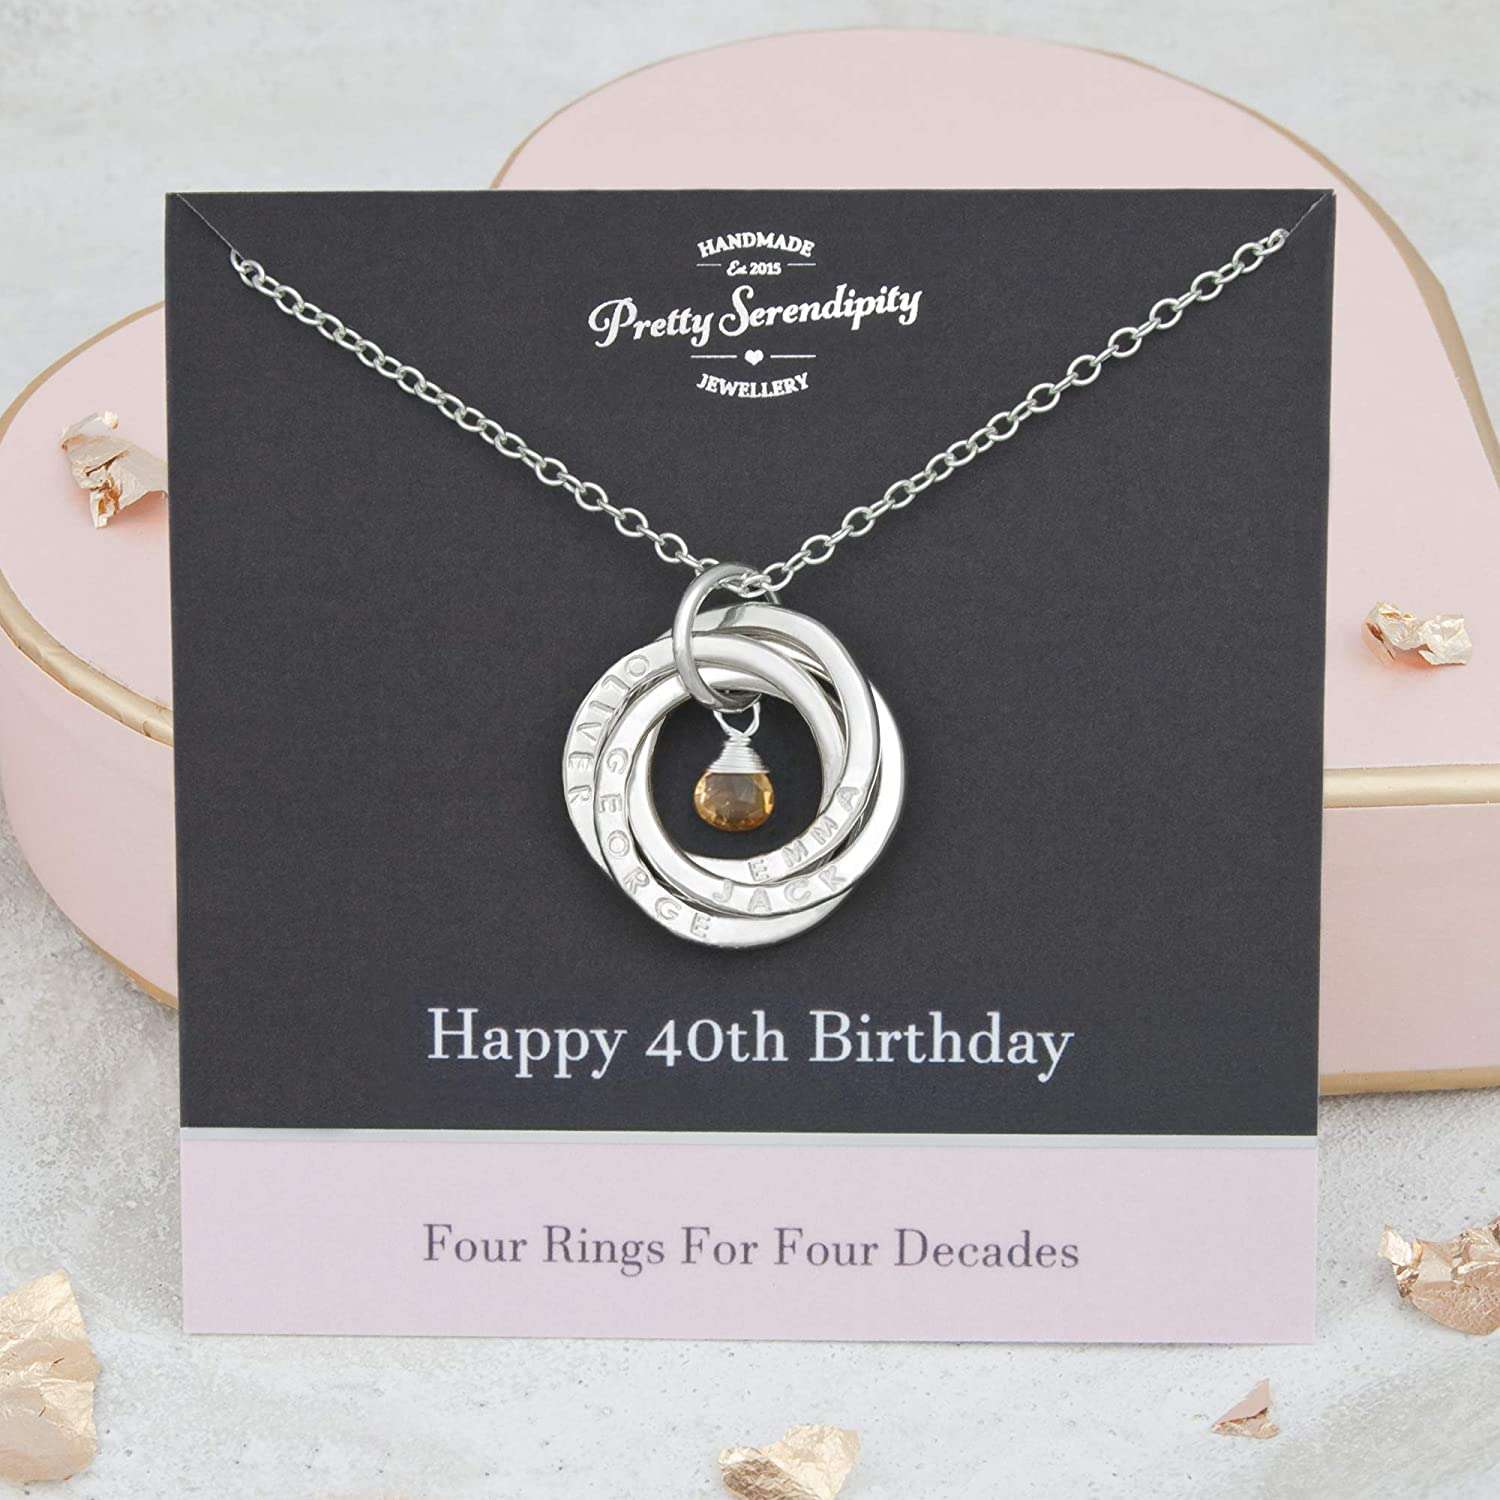 Amazon.com: Personalized 40th Birthday Necklace with ...